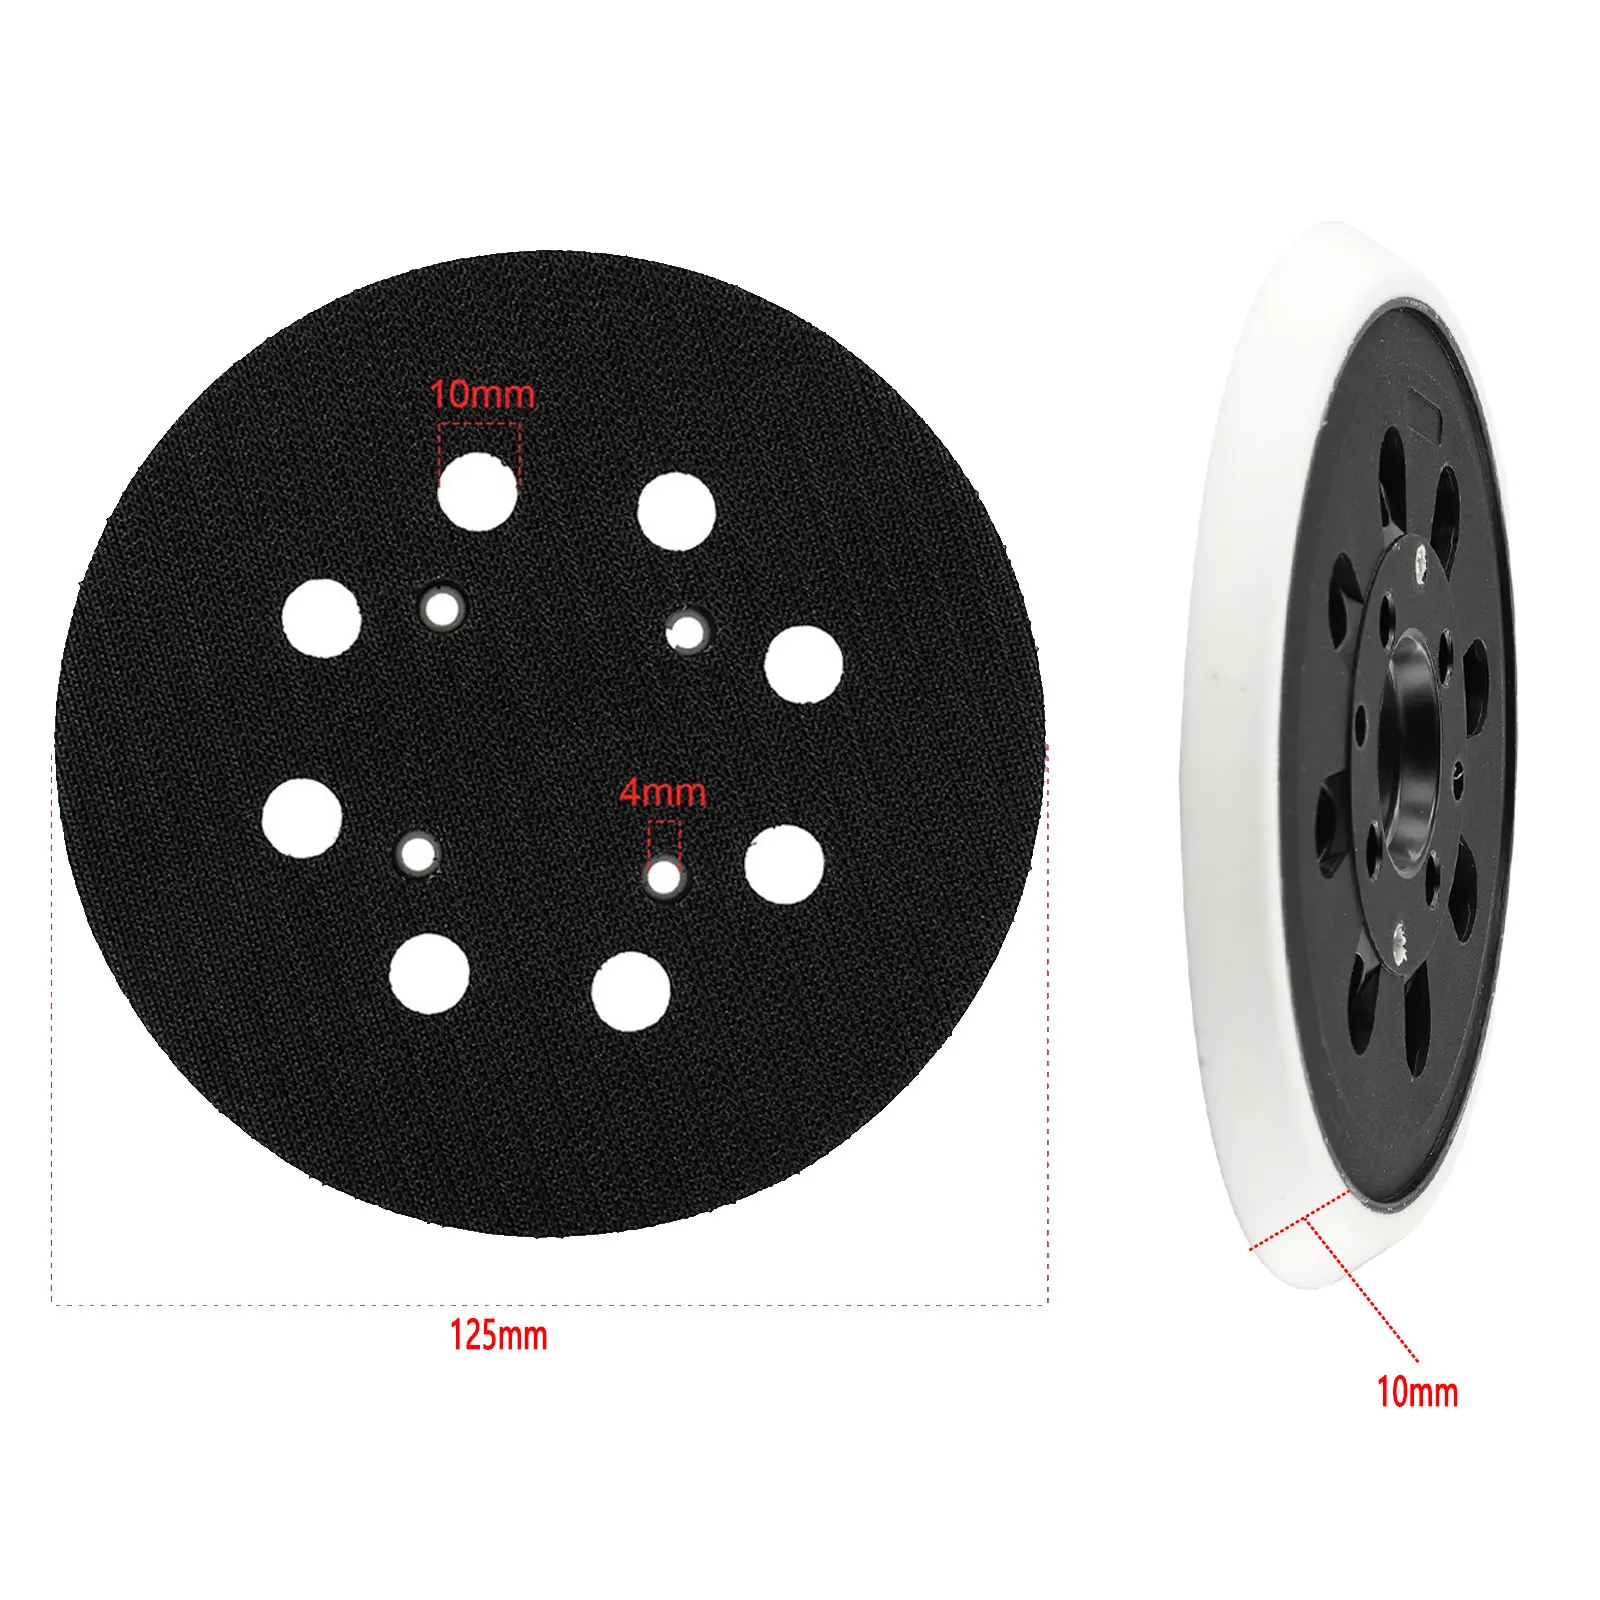 5 Inch 125mm Backing Pad Sanding Pad Hook&loop Connection For Bosch PEX 300 AE 400 AE 4000 AE Power Tools Accessories водонагреватель bosch gwh therm 4000 o wr15 2 p23 7703331746